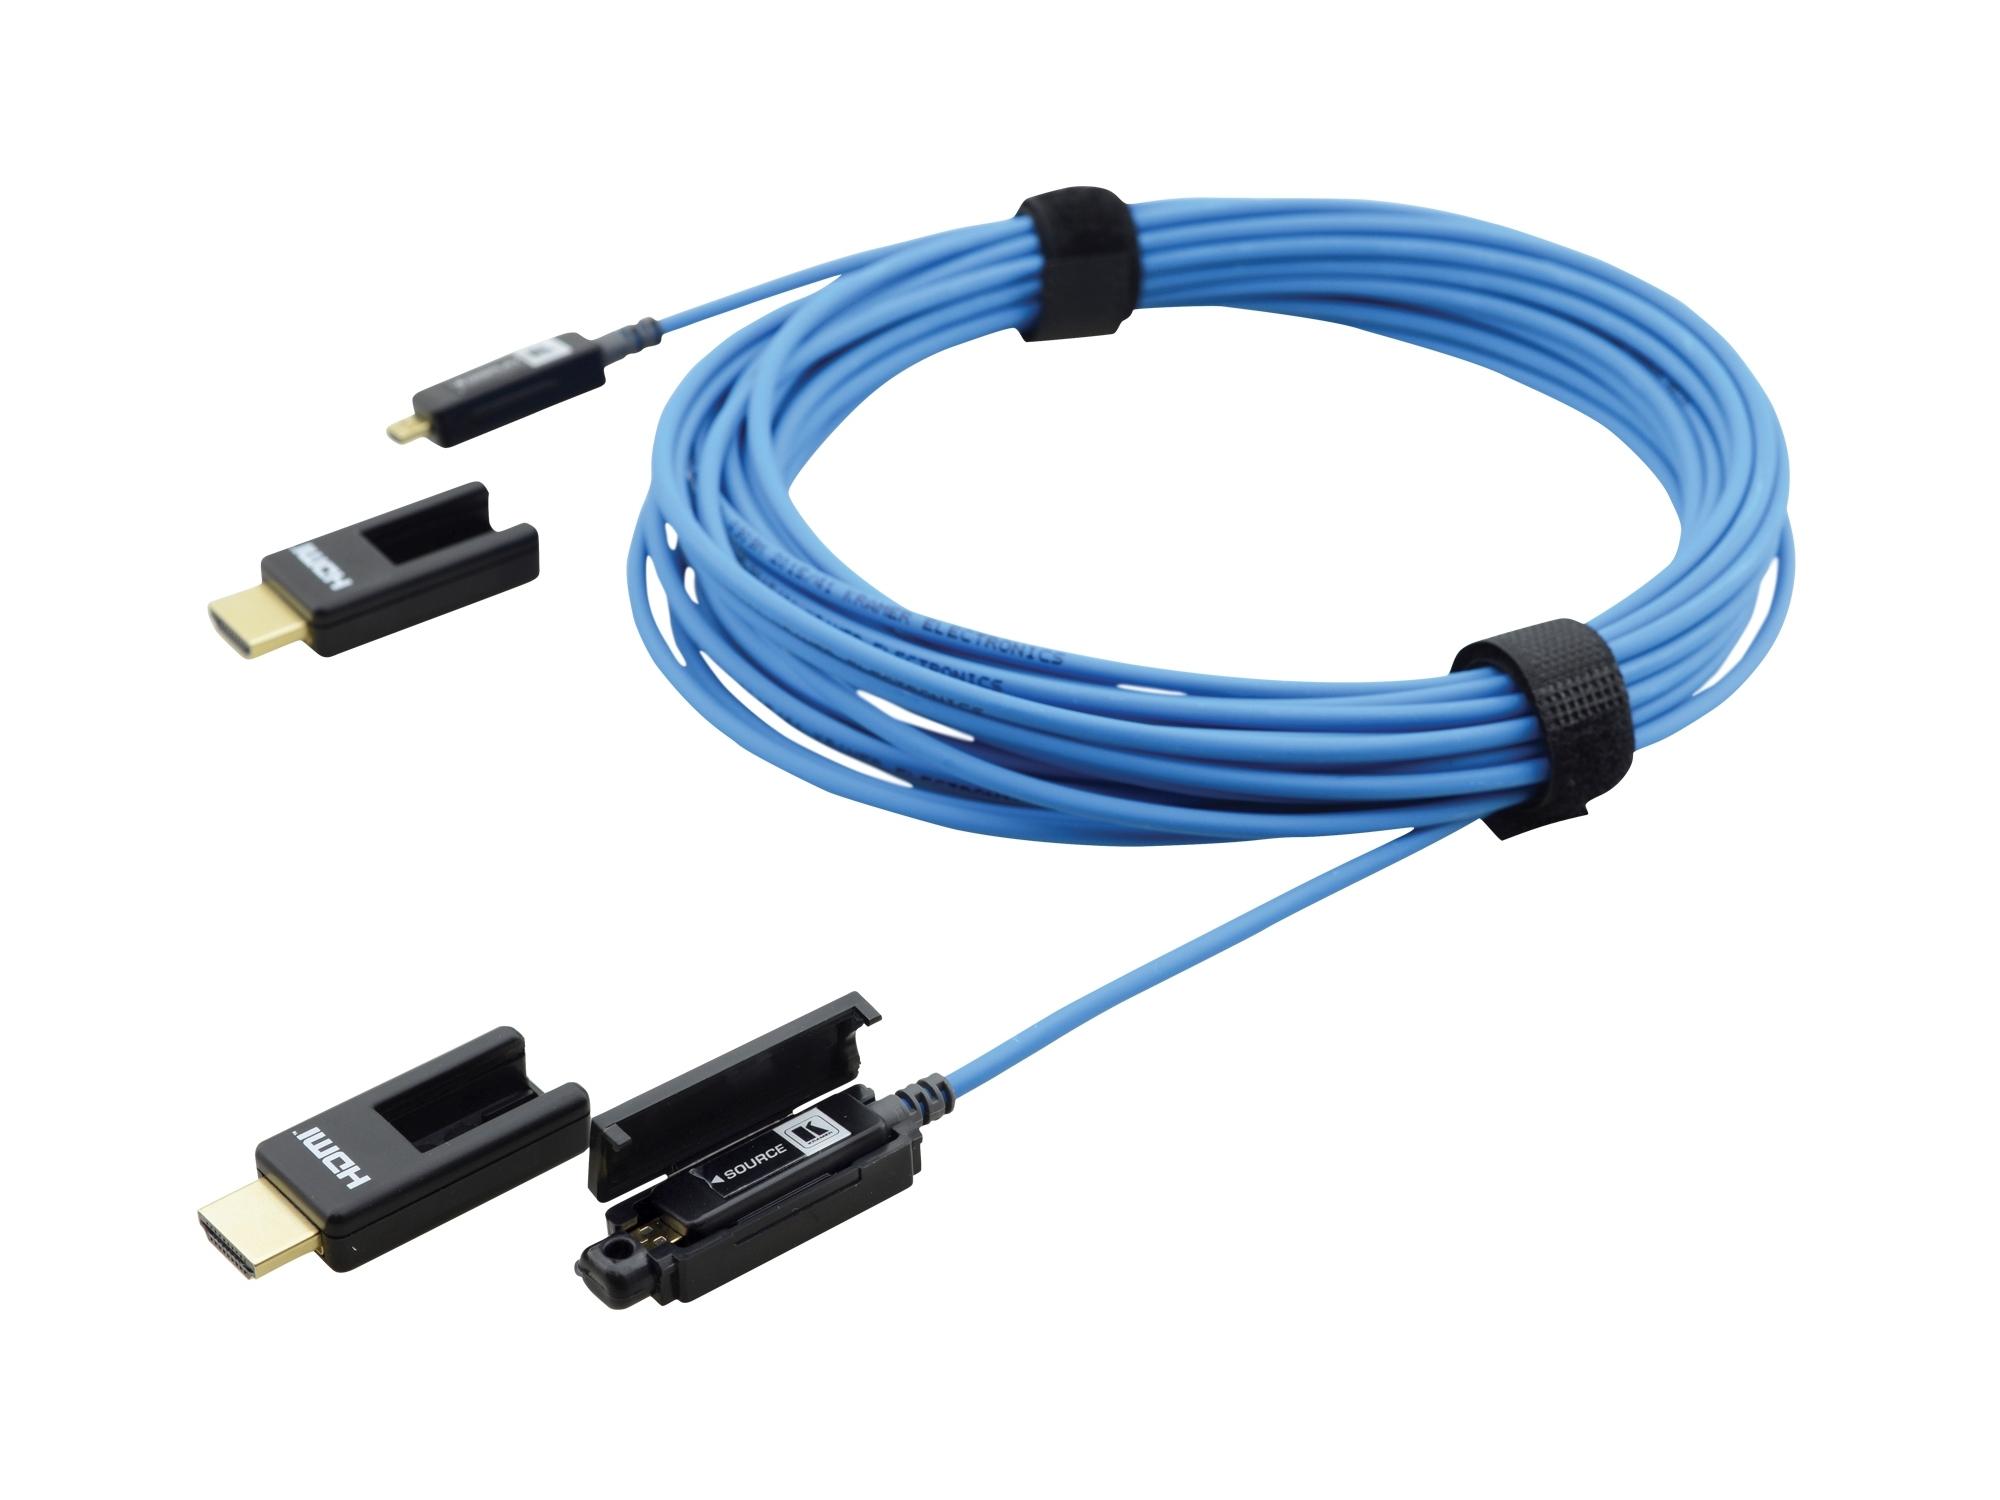 CP-AOCH/XL-131 Fiber Optic High-Speed Pluggable HDMI Cable - 131 ft by Kramer